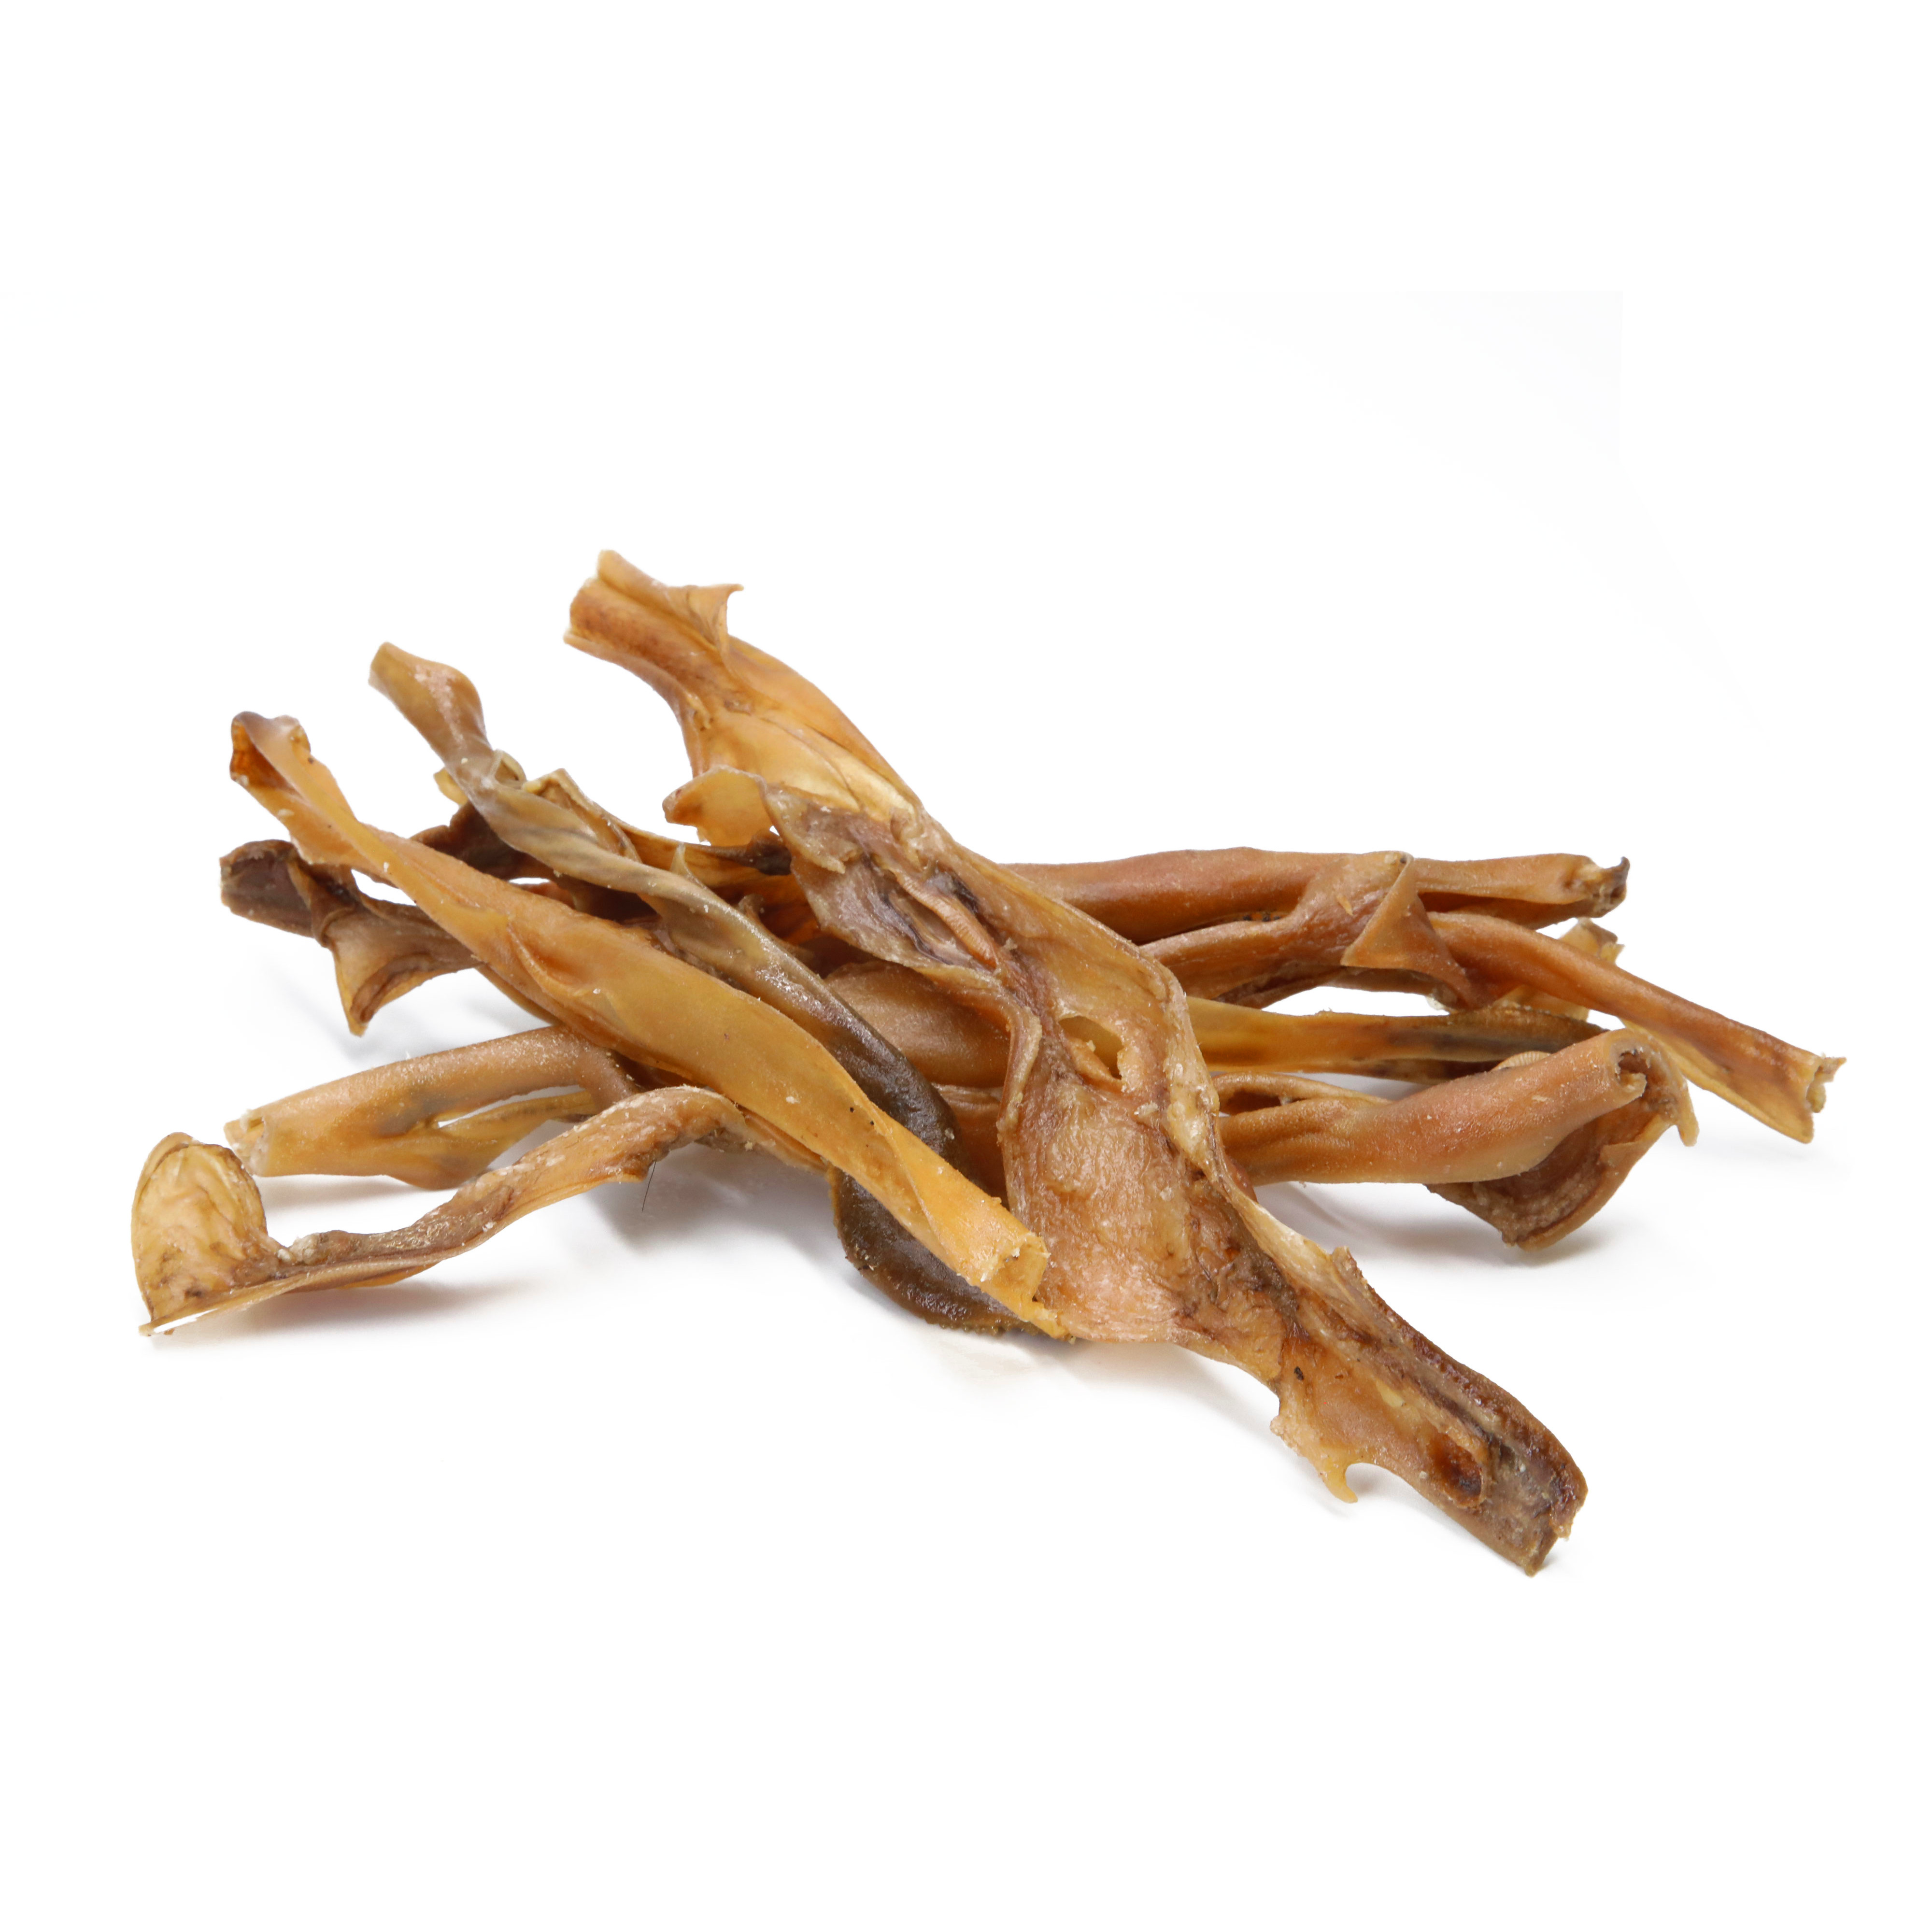 Masterfeed 10 cm Rabbit Hide Chews: Fresh, Locally-Sourced Ingredients for Your Pets Delight